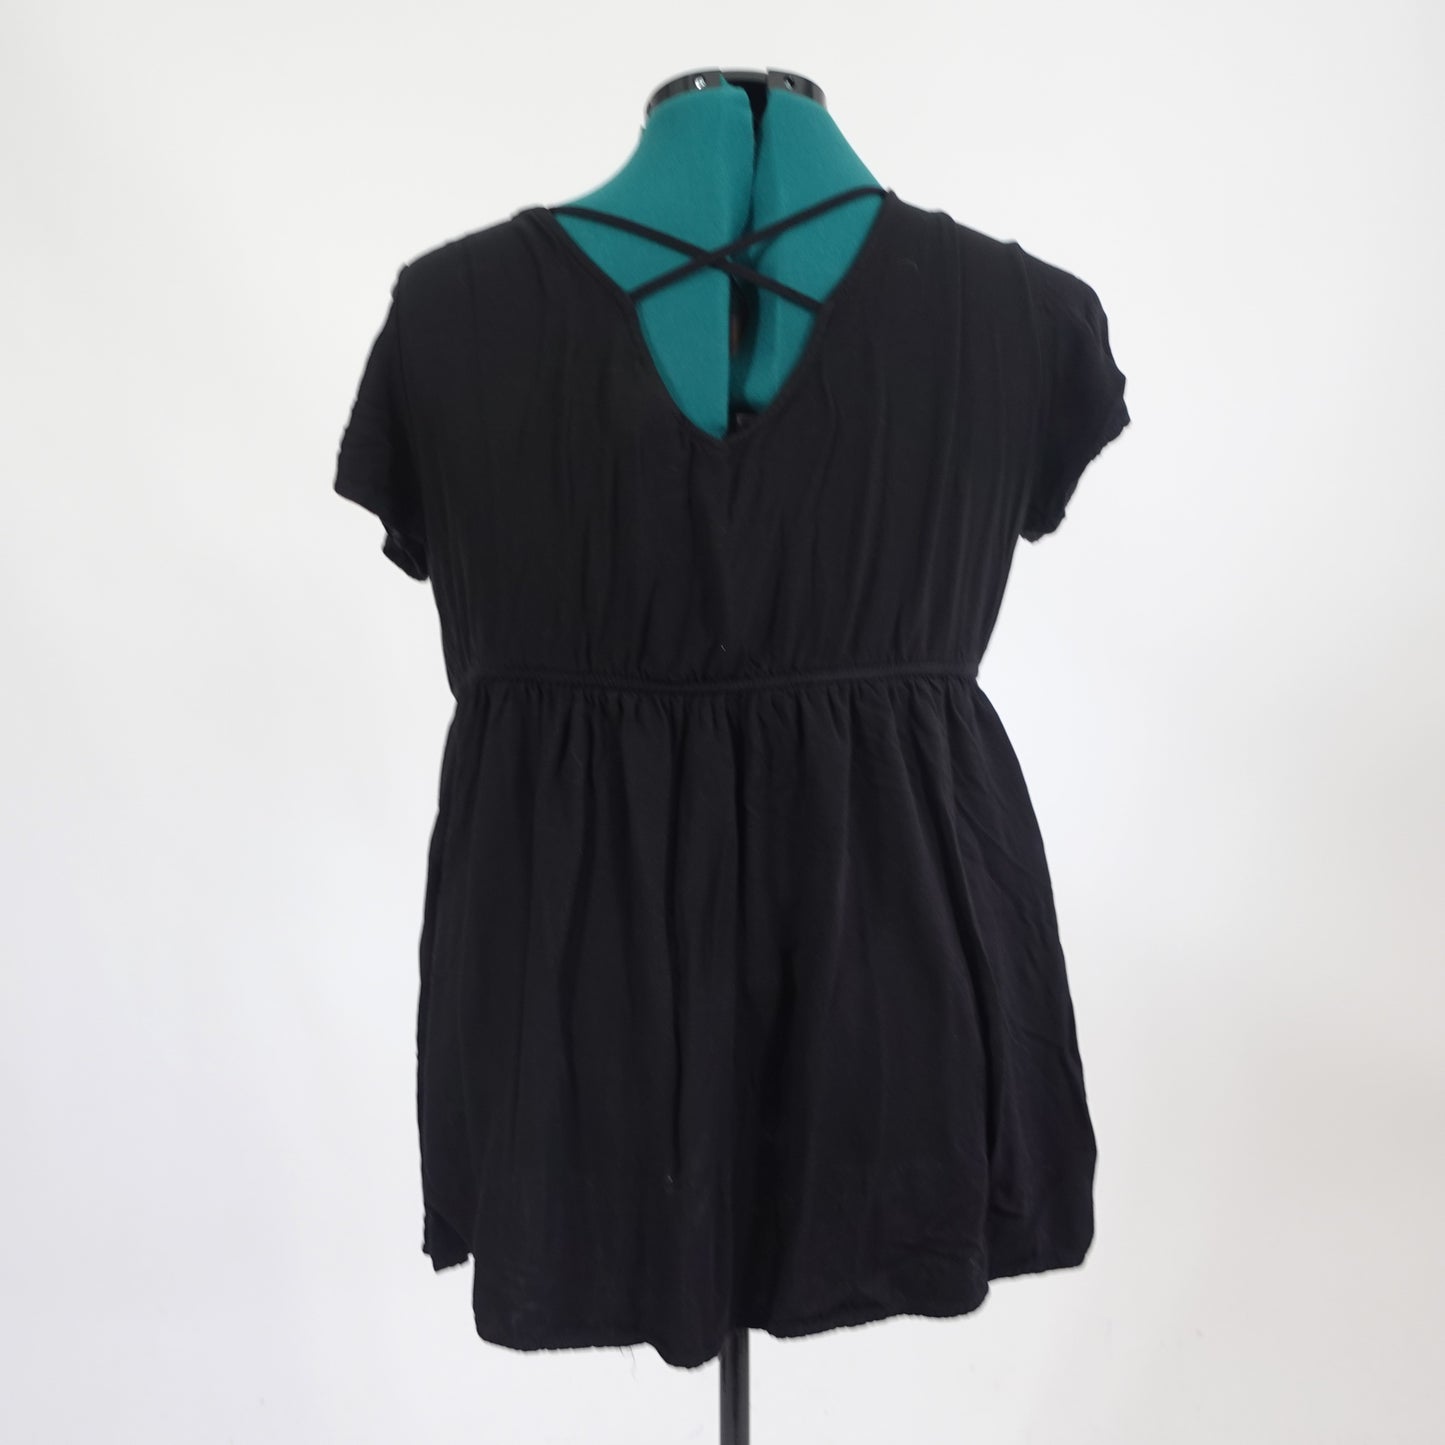 Black Peplum Top with Cut Out Back